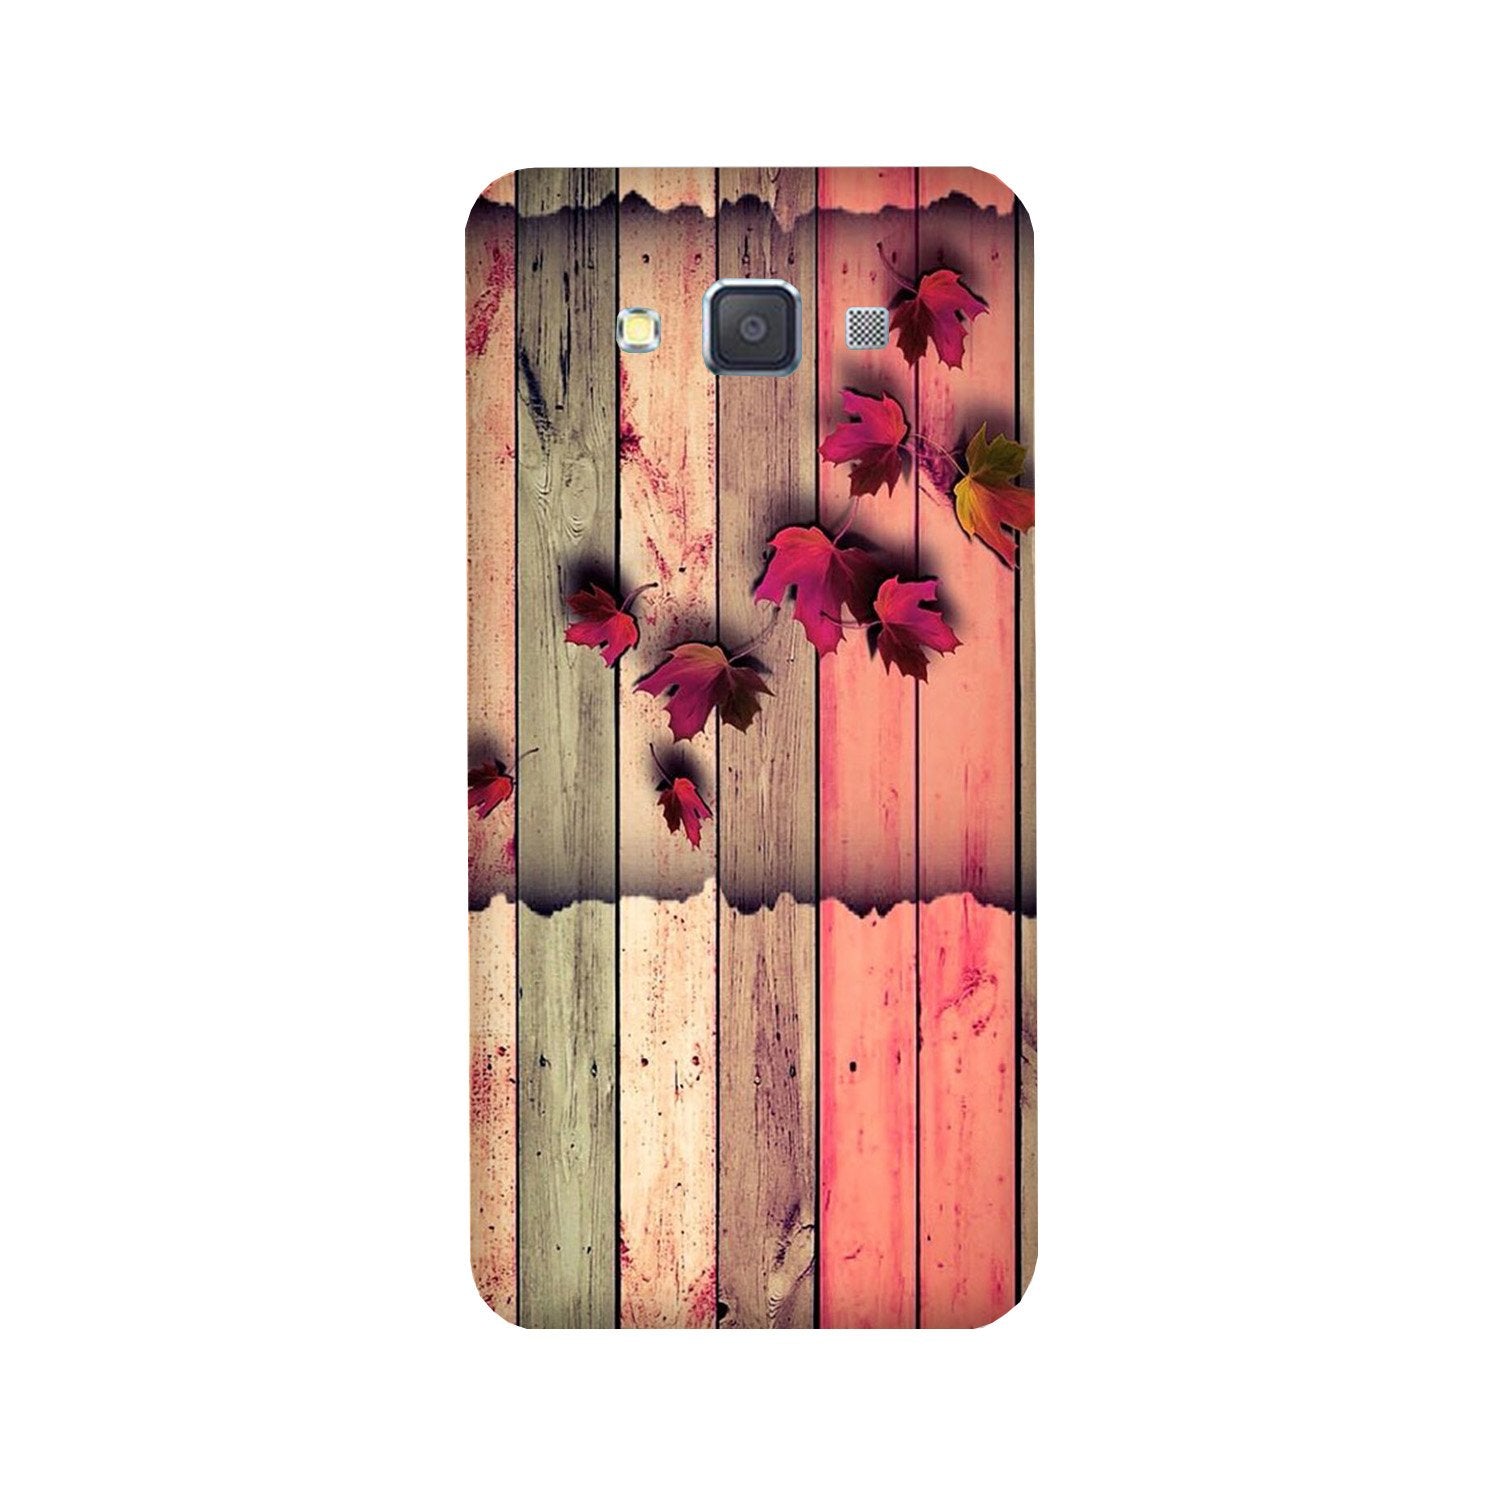 Wooden look2 Case for Galaxy A5 (2015)